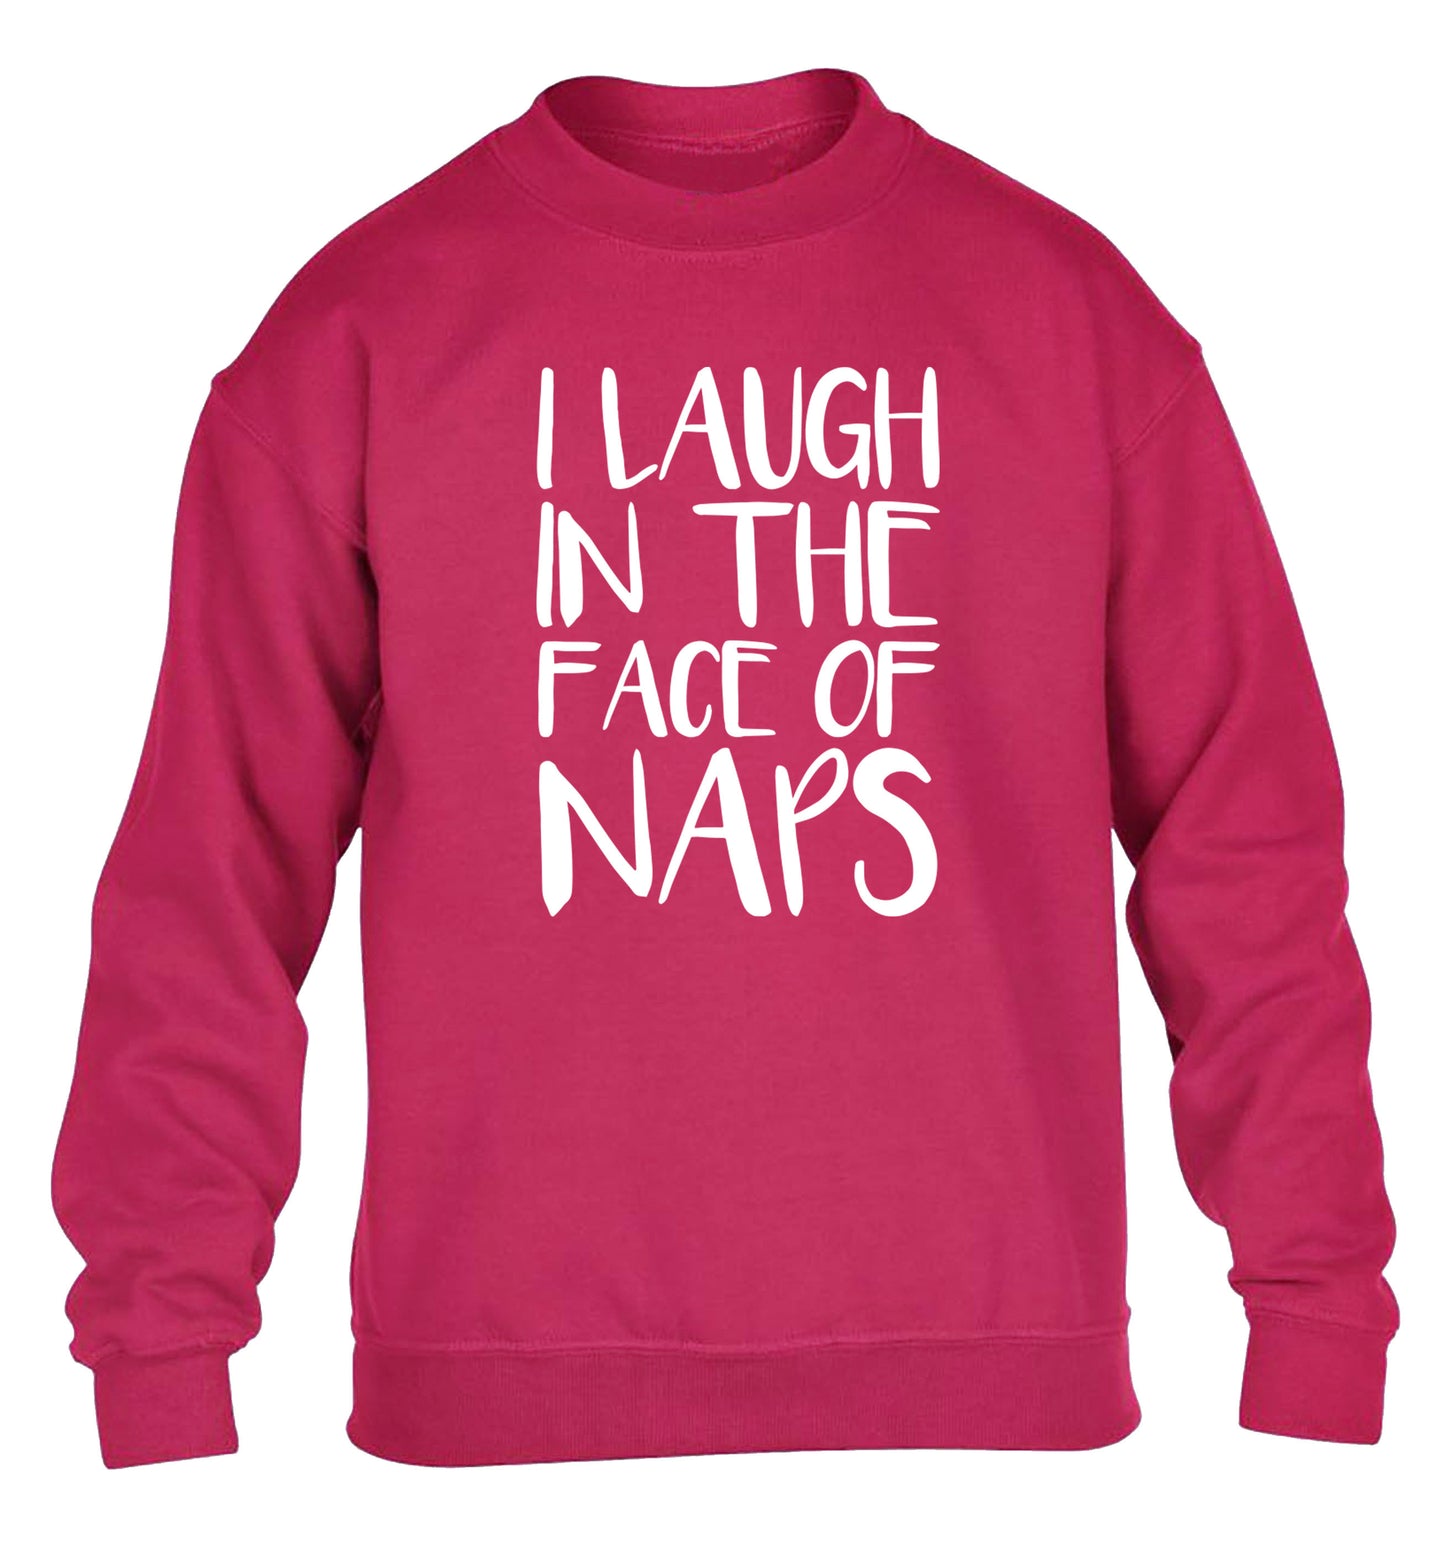 I laugh in the face of naps children's pink sweater 12-14 Years